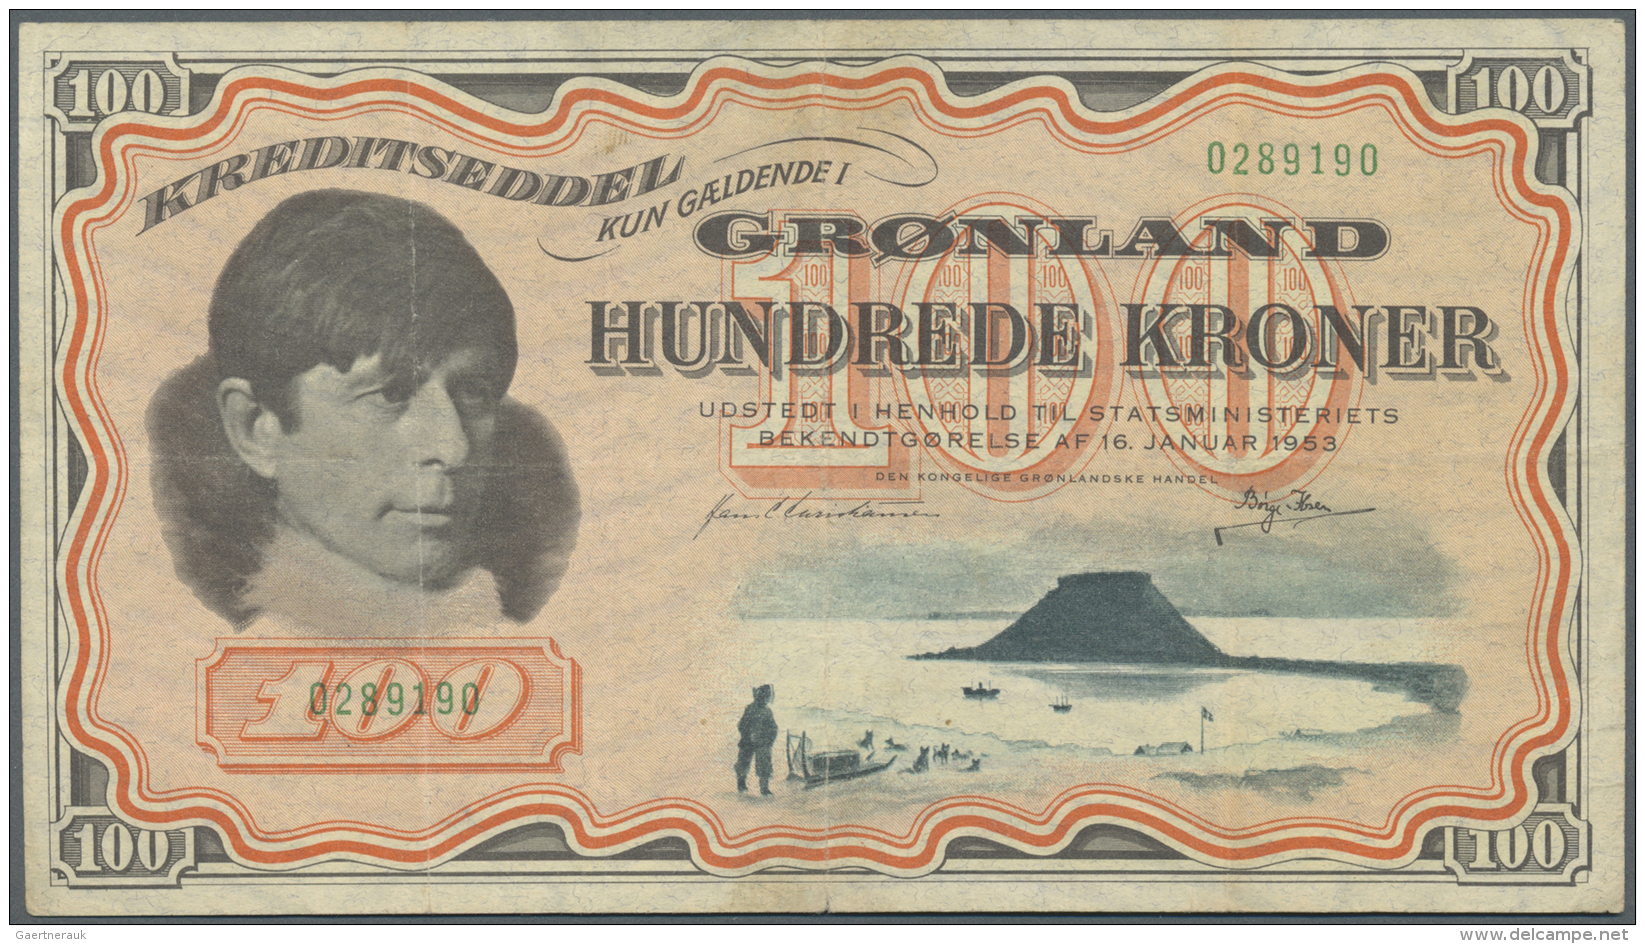 Greenland / Gr&ouml;nland: 100 Kroner 1953 Issued Note, P.21 With Handling Traces, Several Times Folded And Stained On B - Groenlandia